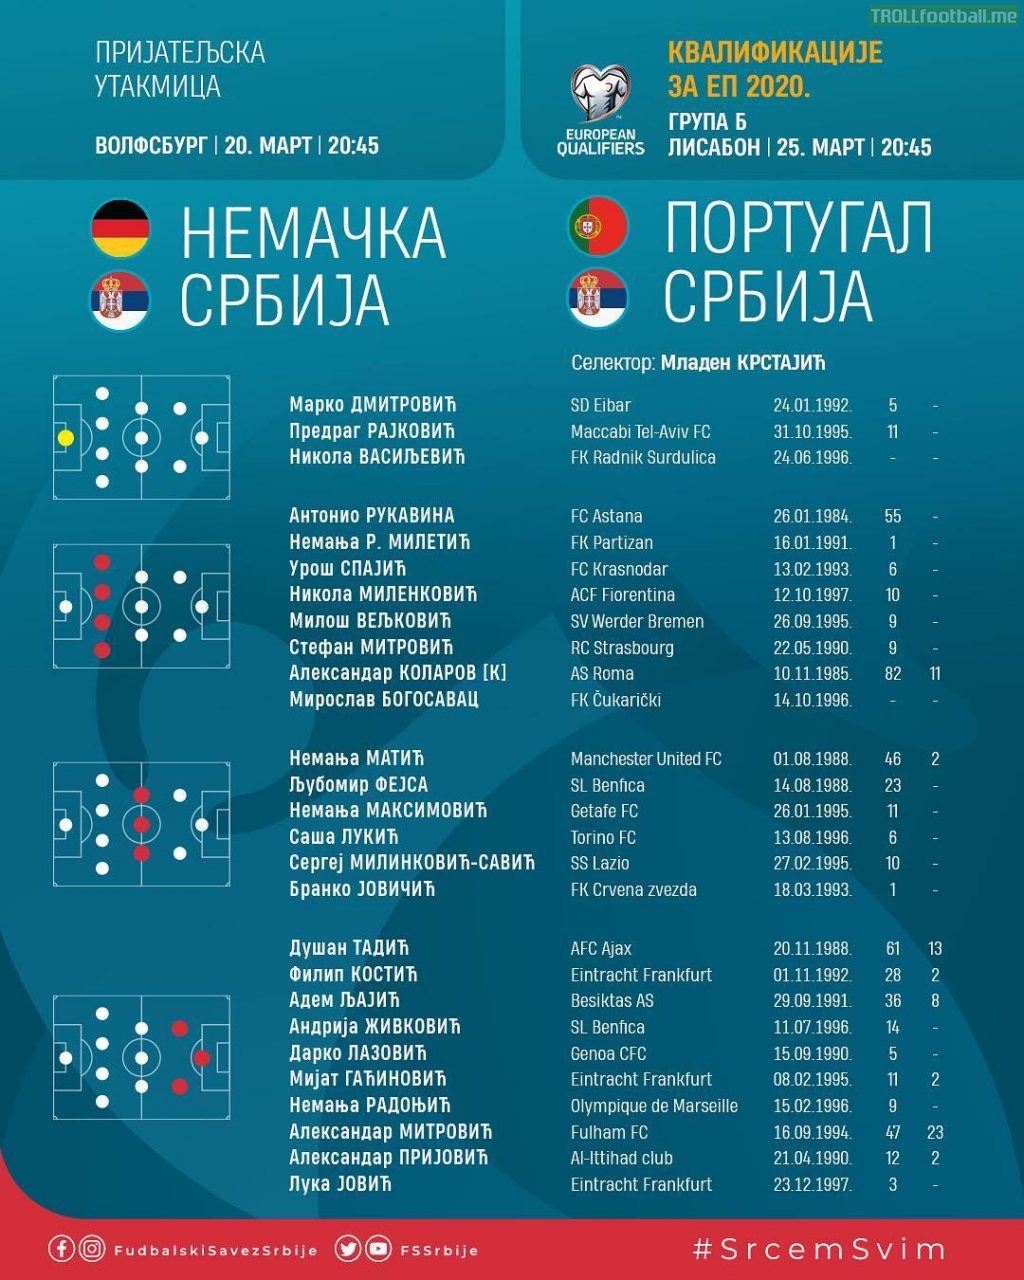 Serbia squad for EURO 2020 qualifiers matches vs Germany and Portugal